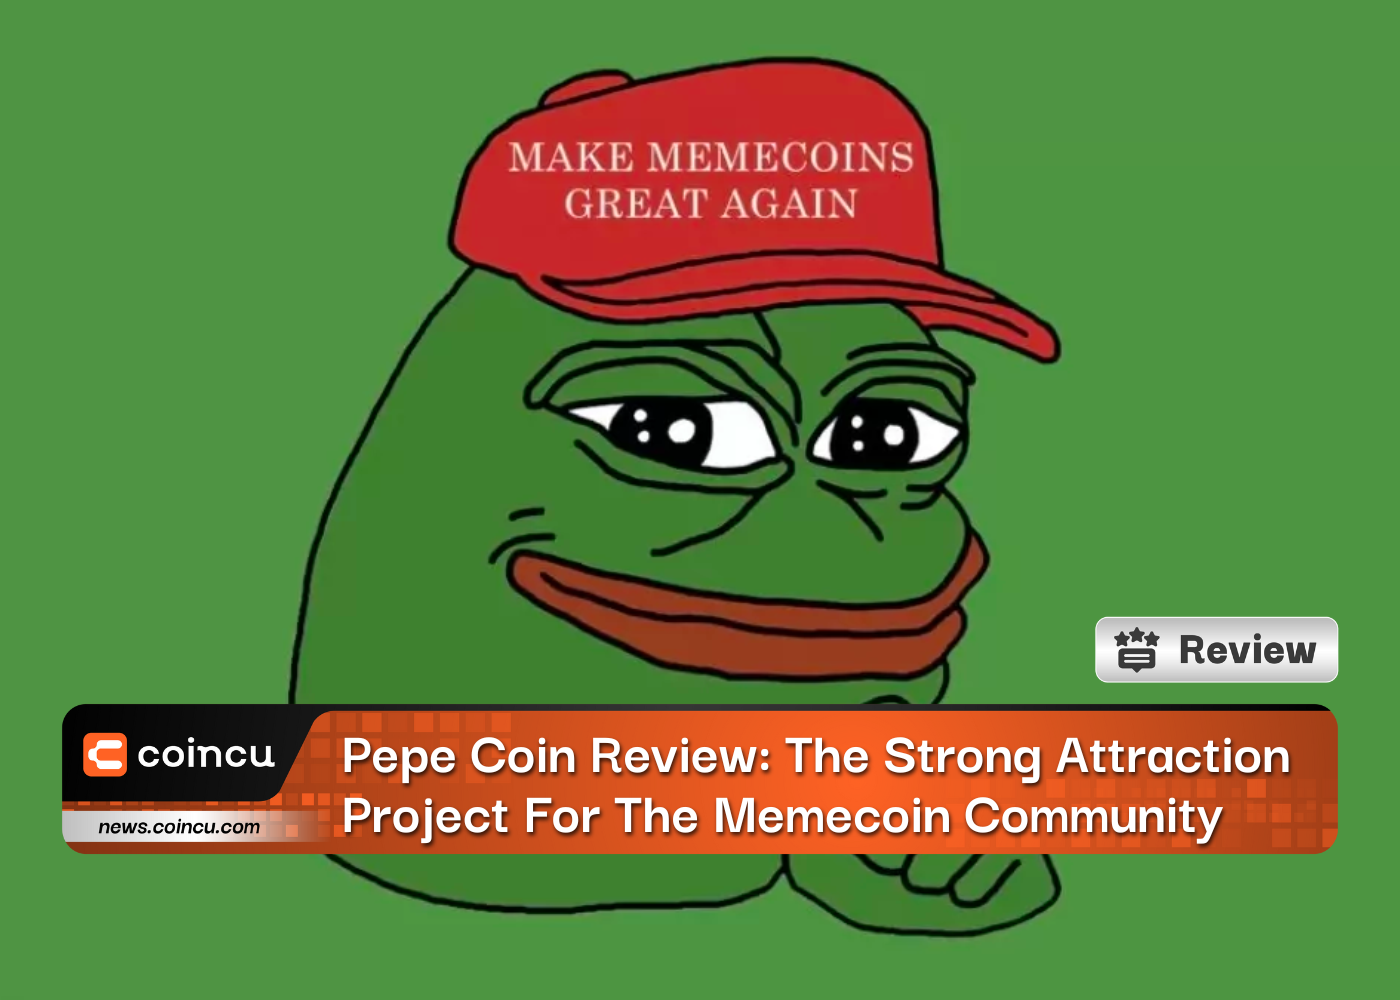 Pepe Coin Review: The Strong Attraction Project For The Memecoin Community